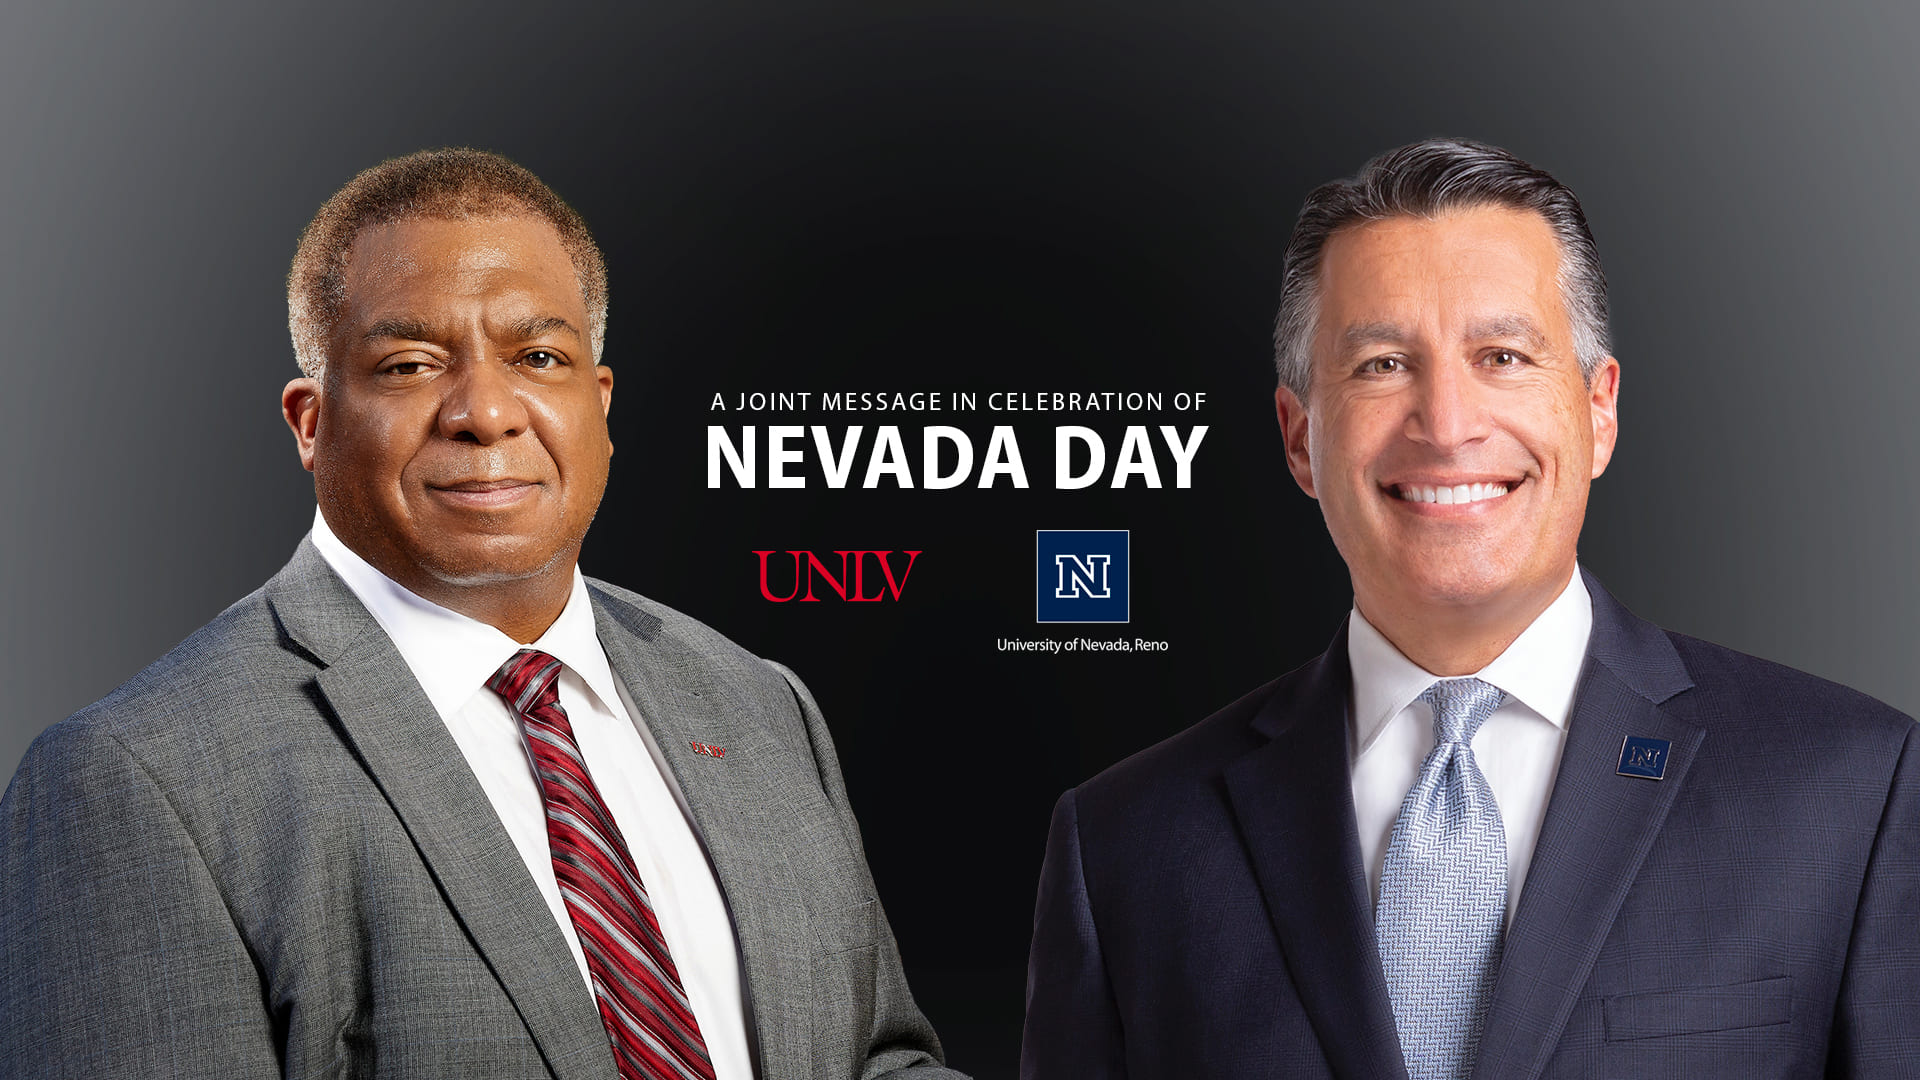 University of Nevada, Las Vegas President, Keith Whitfield, and University of Nevada, Reno President, Brian Sandoval stand next to each other with each university's logo between them and the words "A joint message in celebration of Nevada Day" in between them.